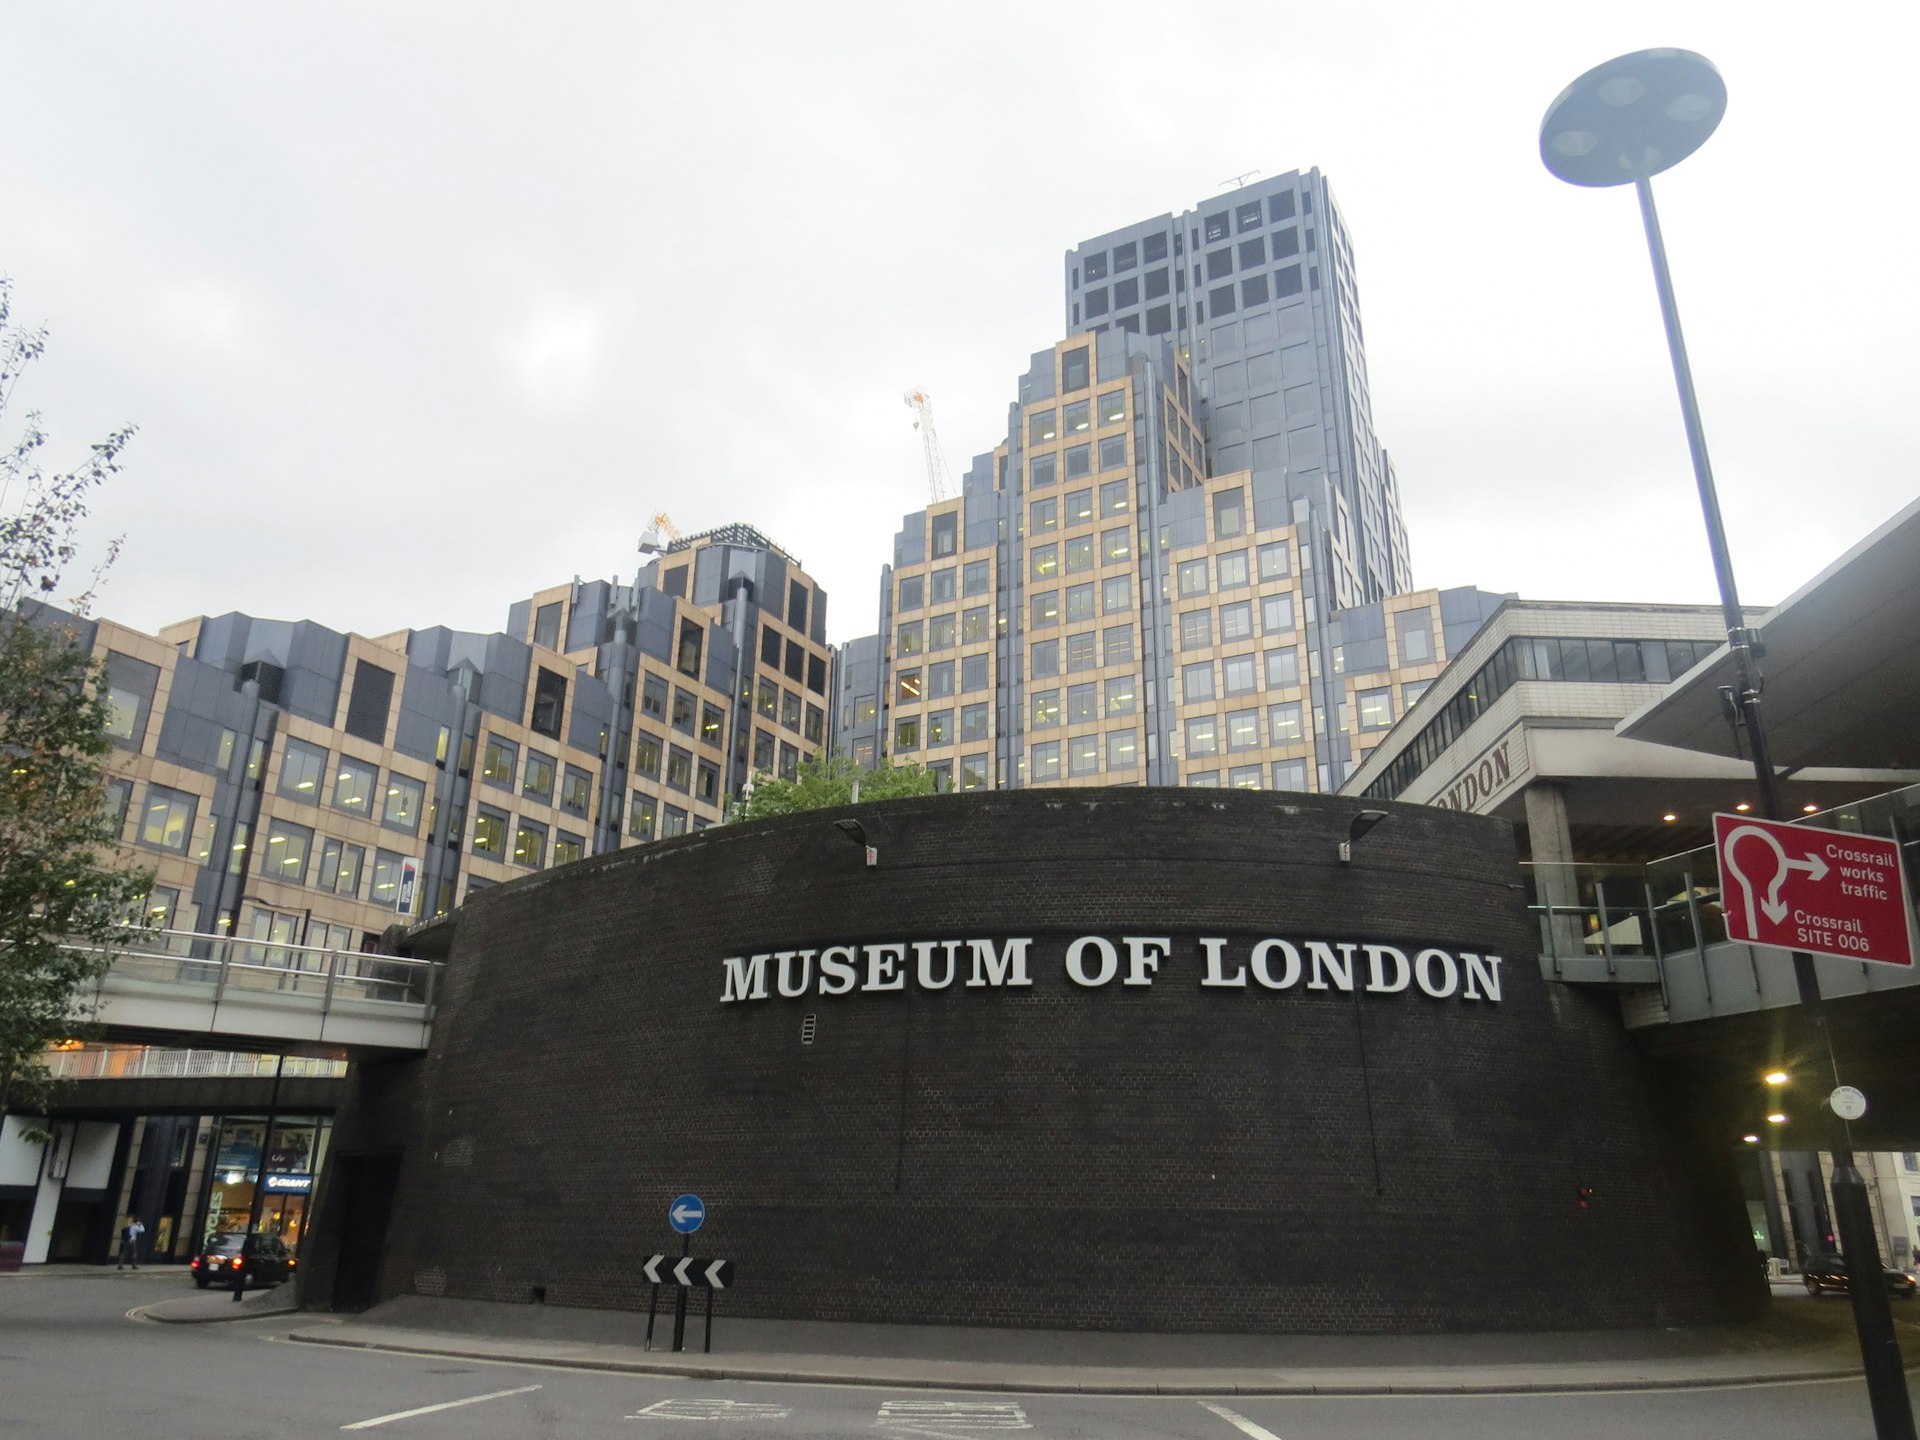 The exterior of the Museum of London in England